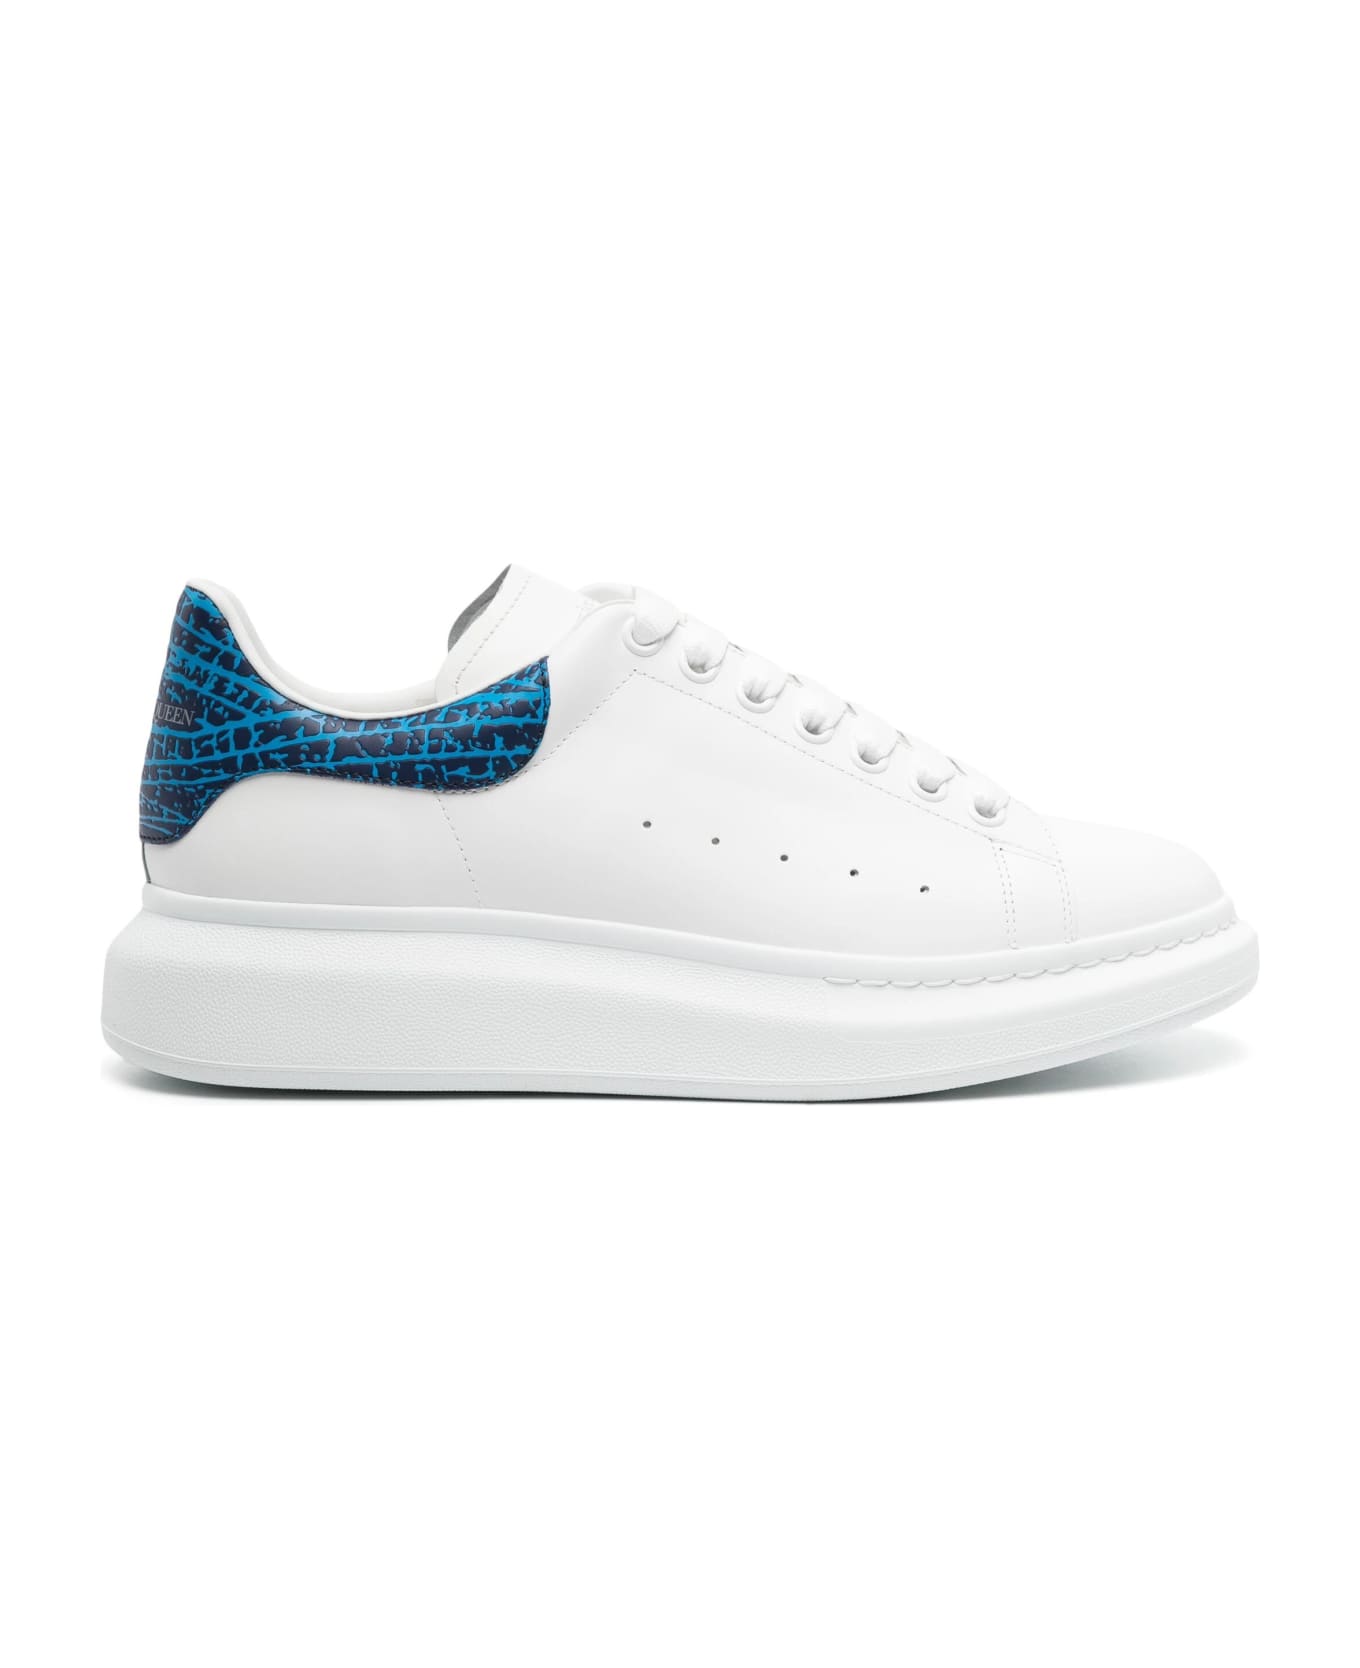 Alexander McQueen Lapis Lazuli Blue And White Oversized Sneakers - White